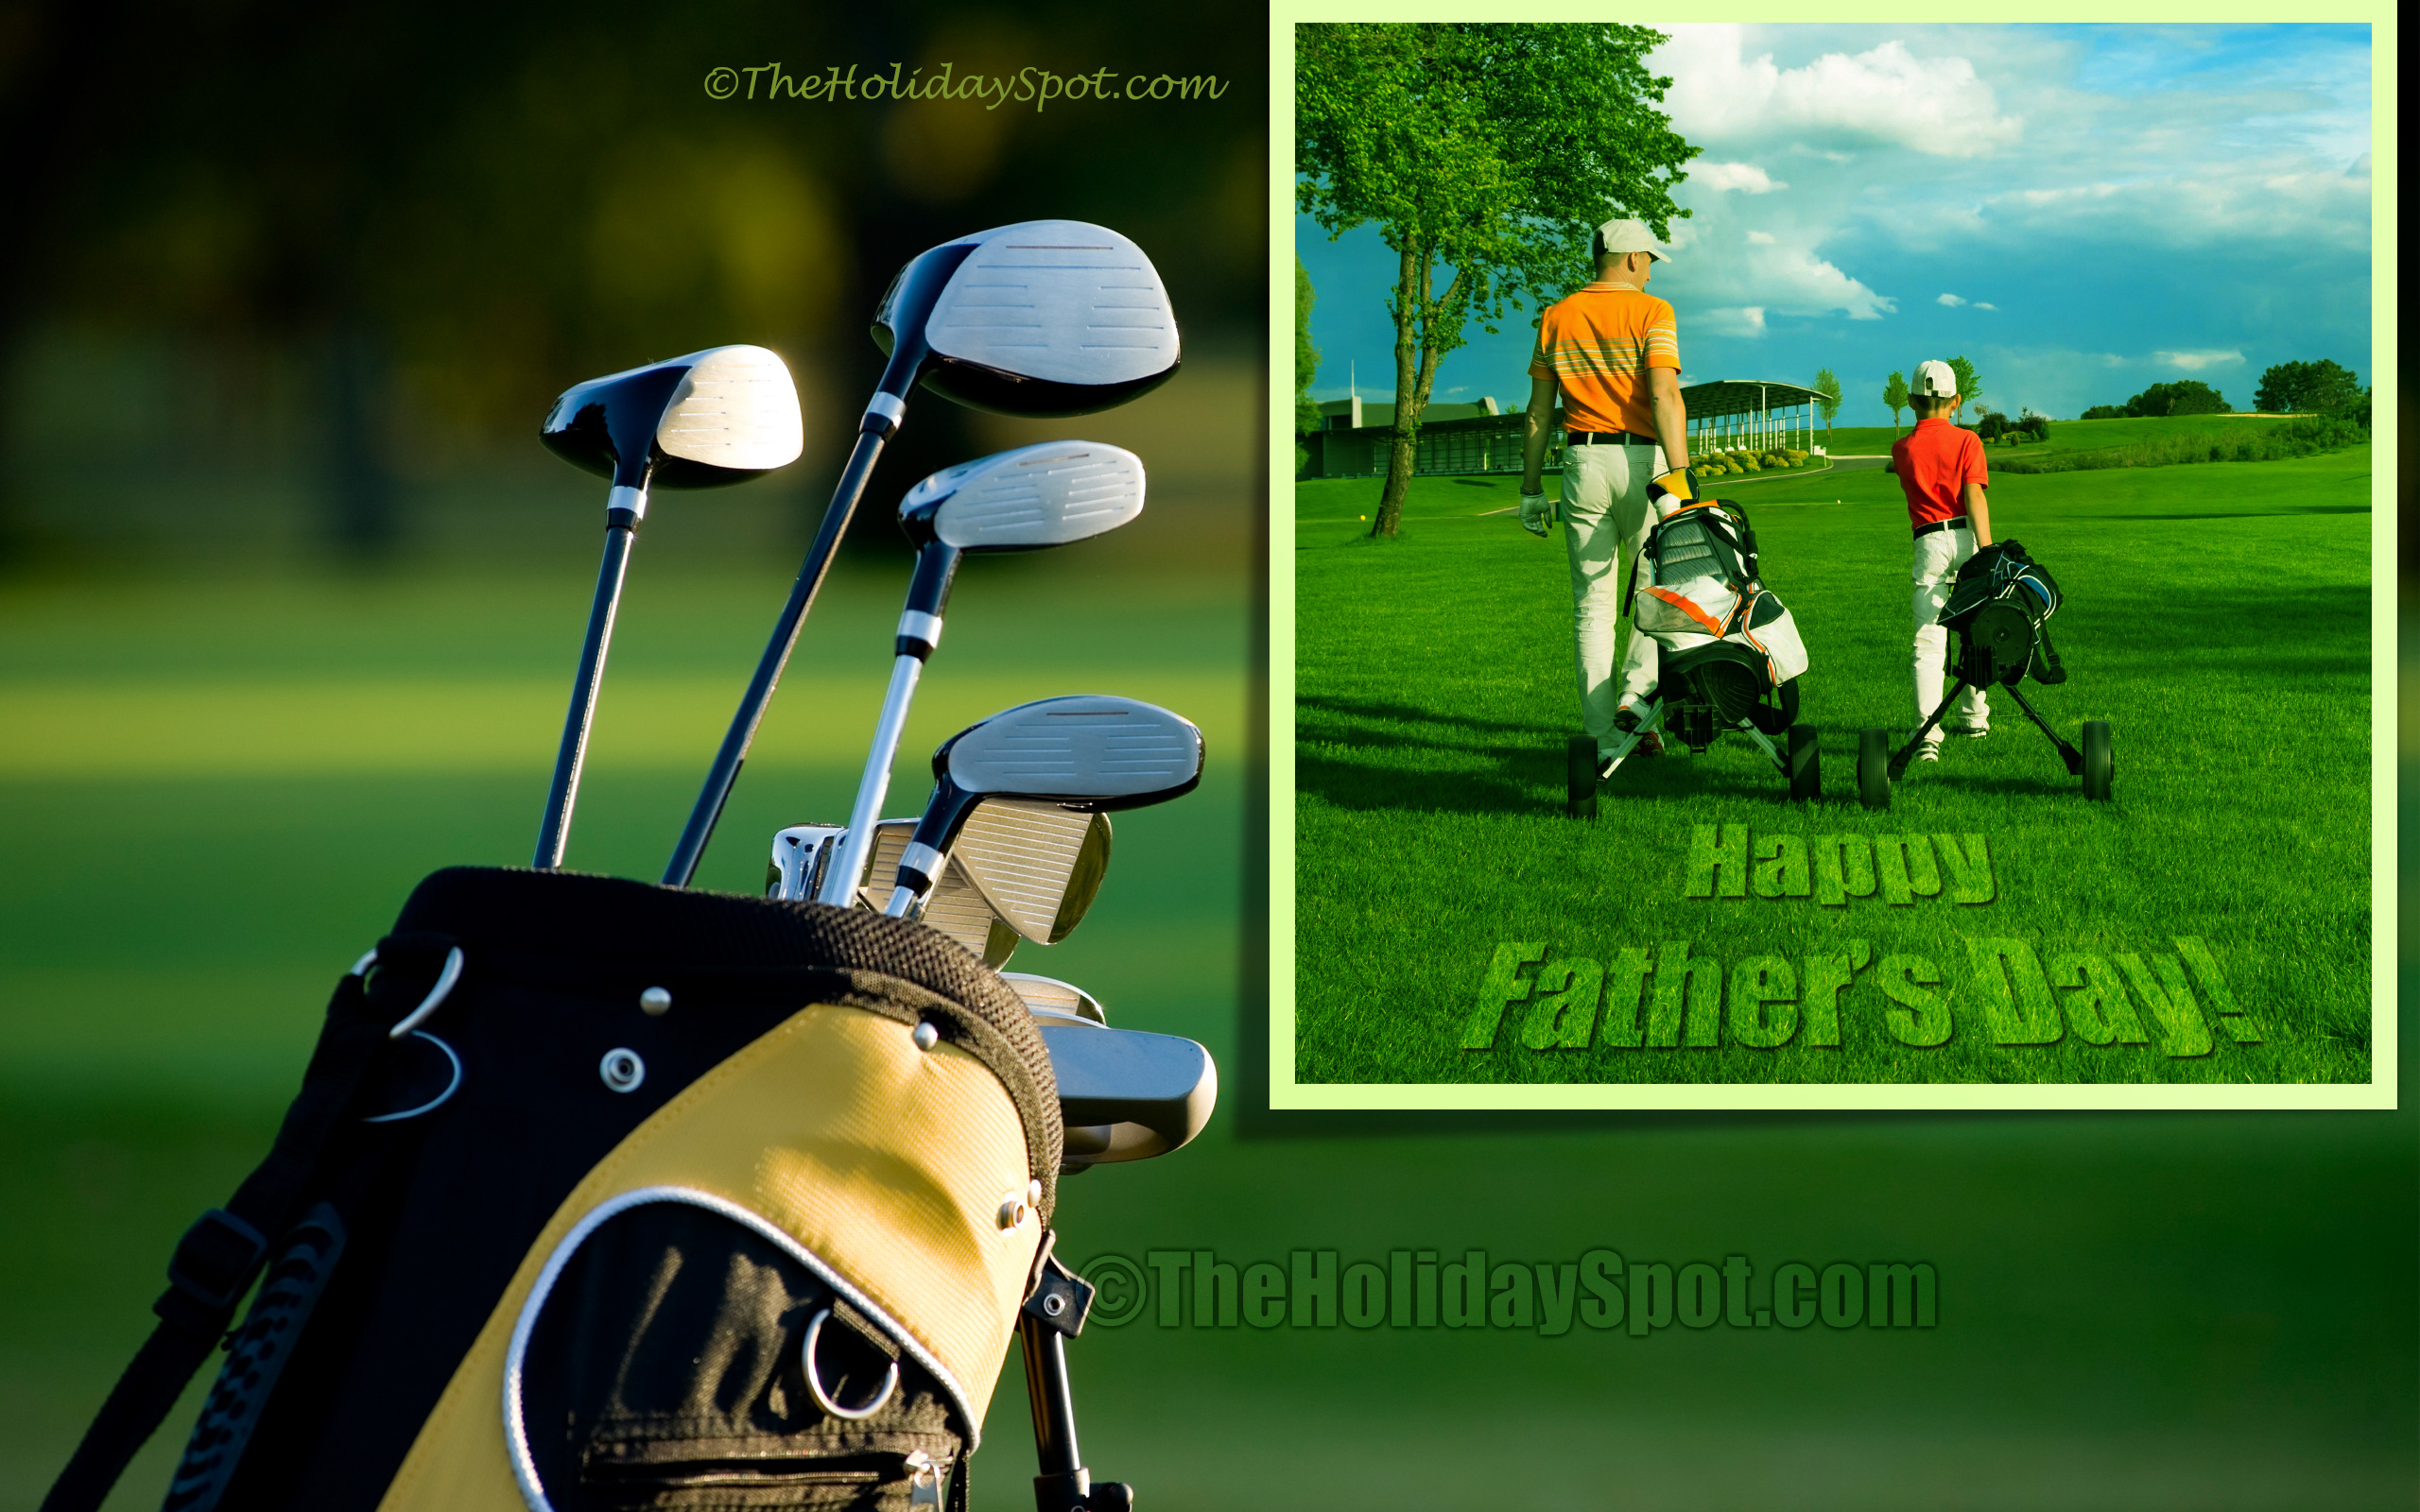 Happy Father S Day Wallpaper Themed With Golf - Fathers Day Wishes Golf Themed - HD Wallpaper 